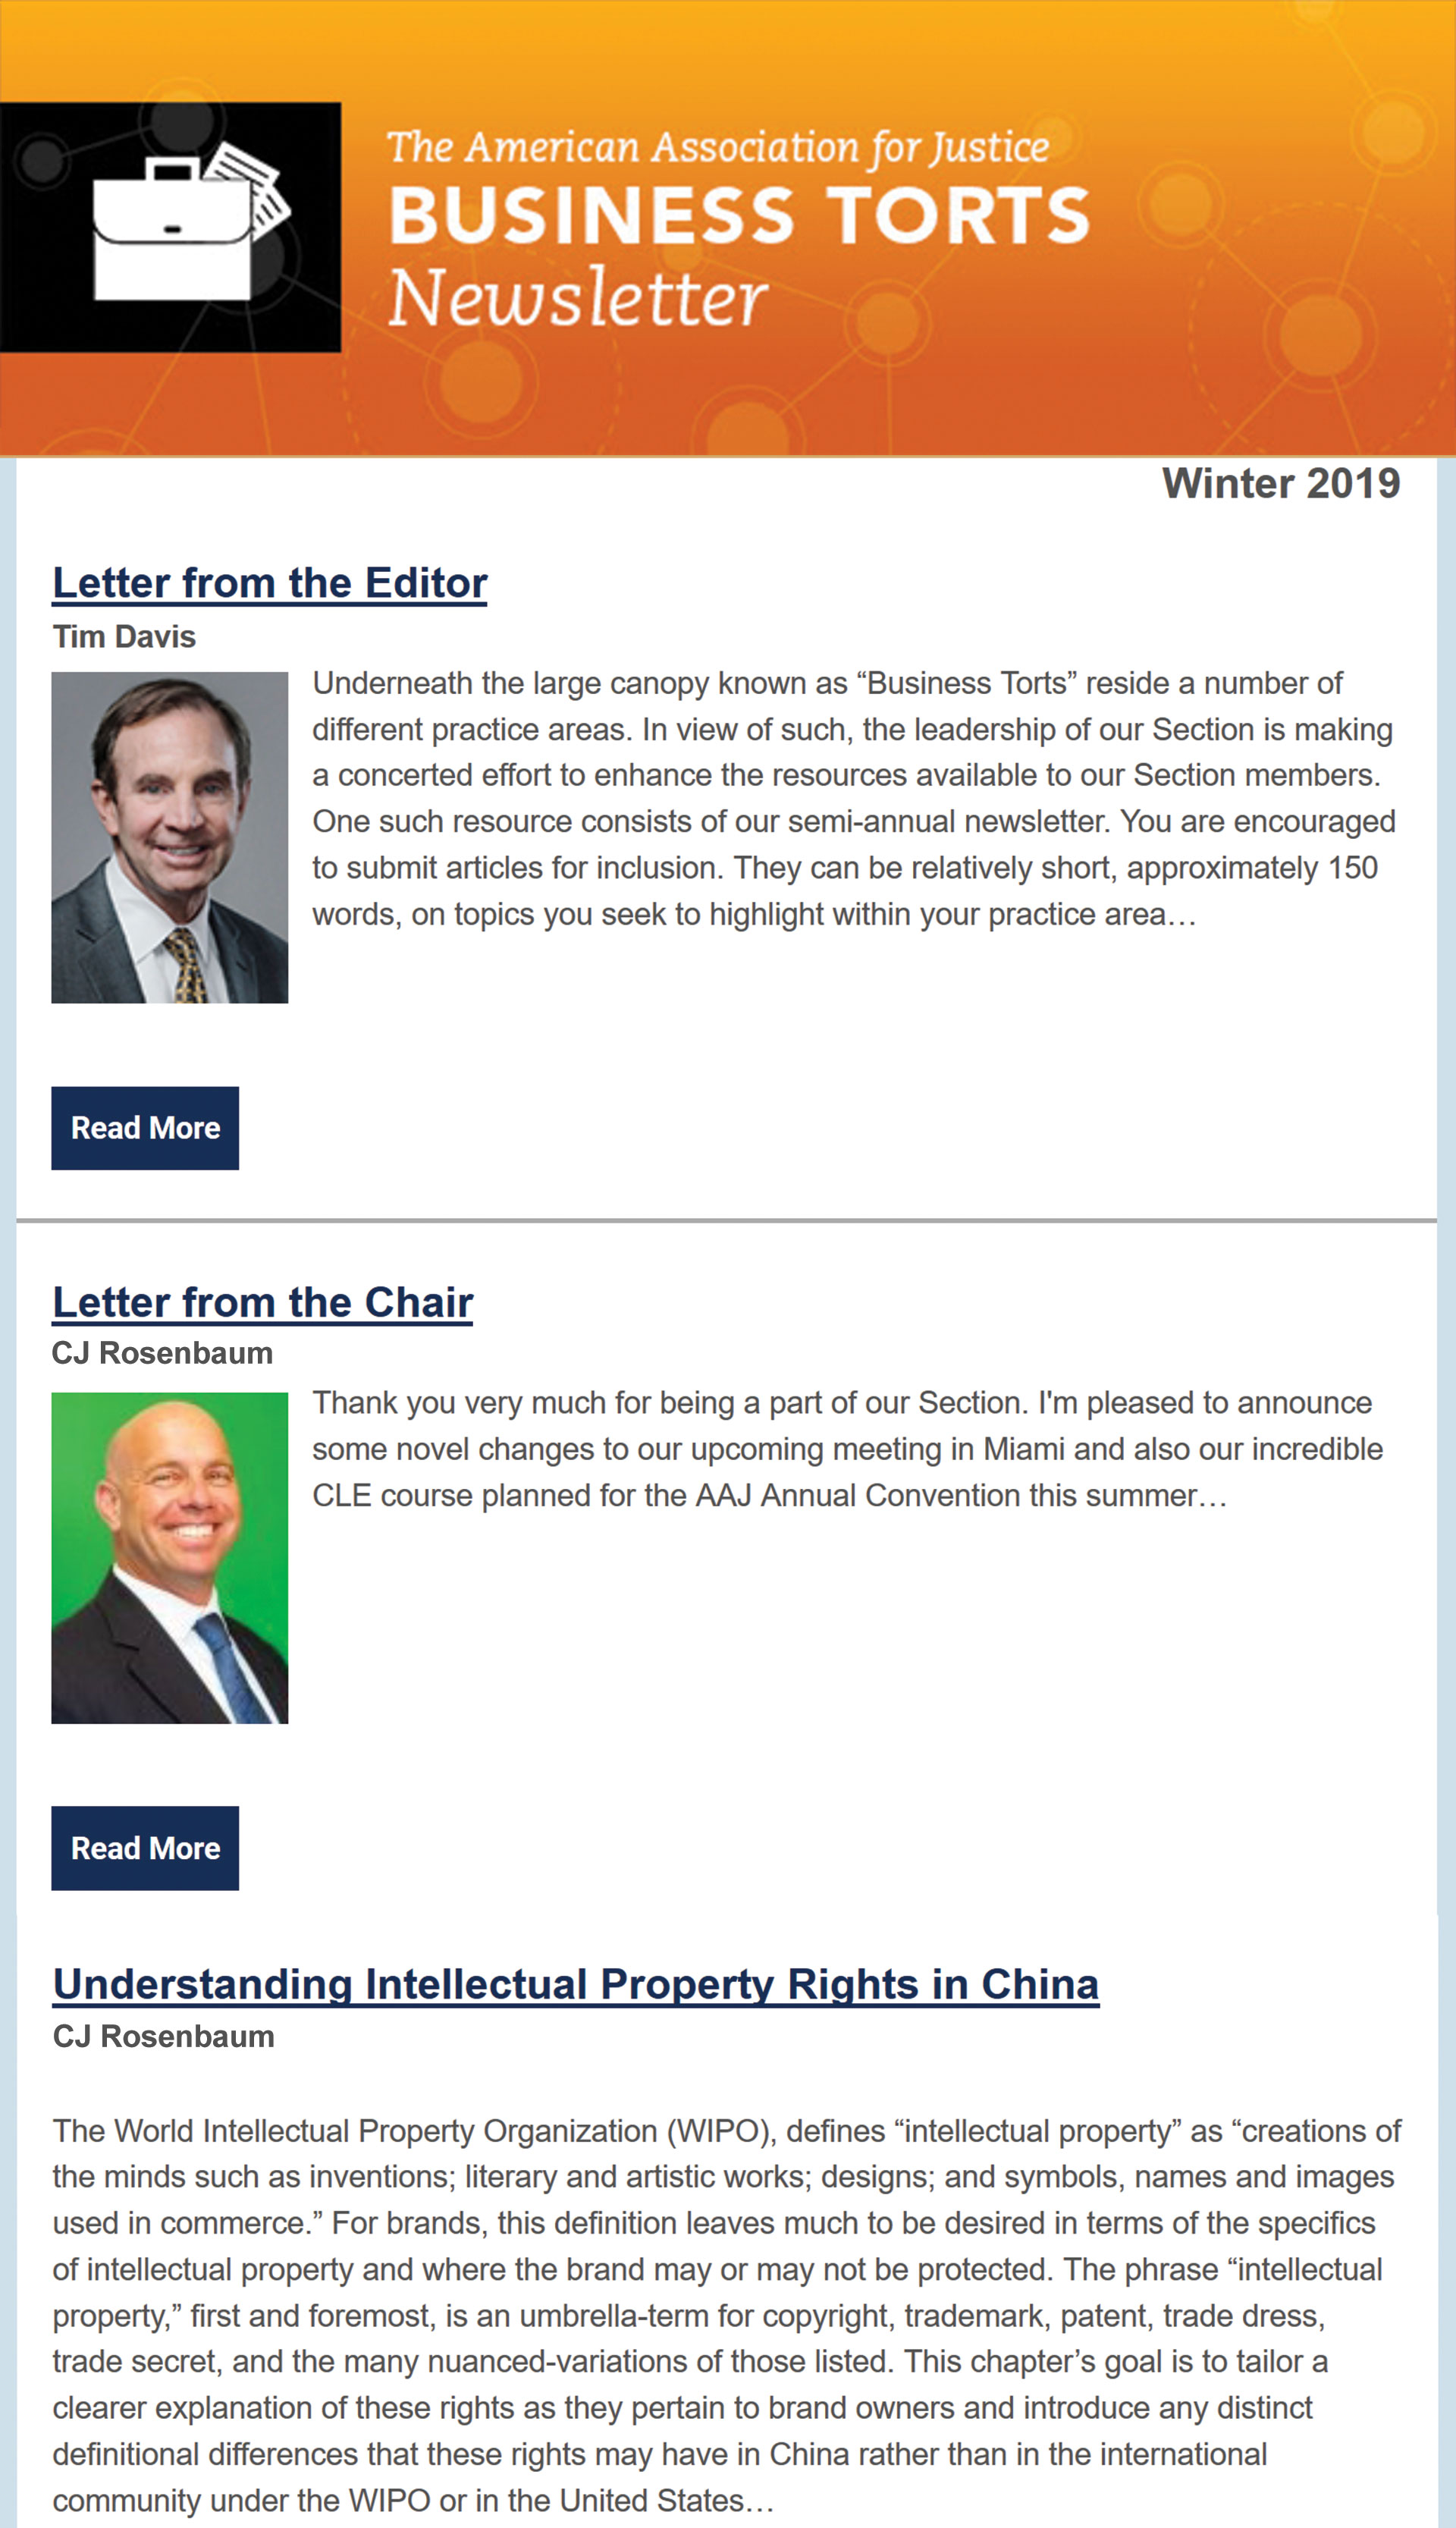 American Association for Justice Business Torts Newsletter Winter 2019 - Intellectual Property Rights in China